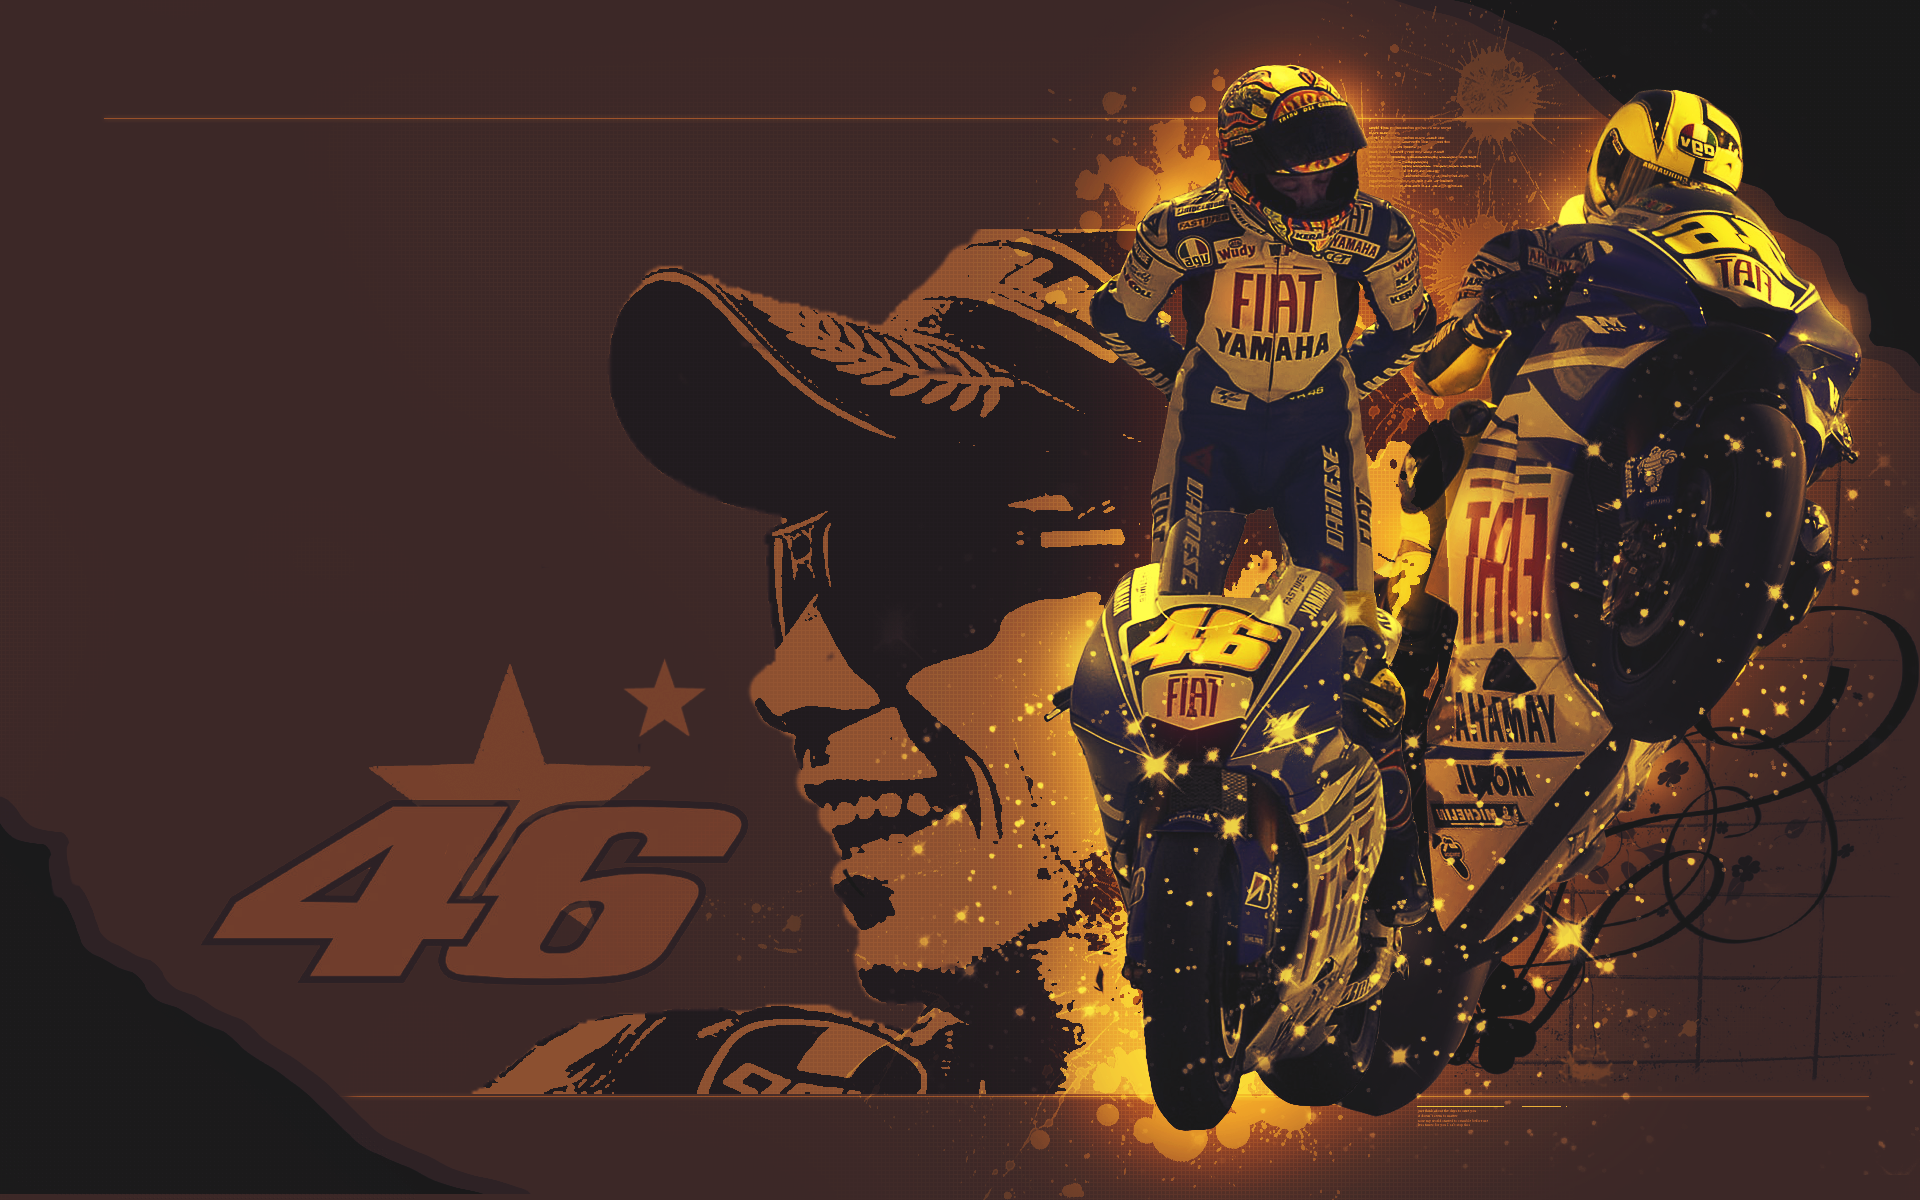 Image Vr46 Wallpaper Pc Android iPhone And iPad